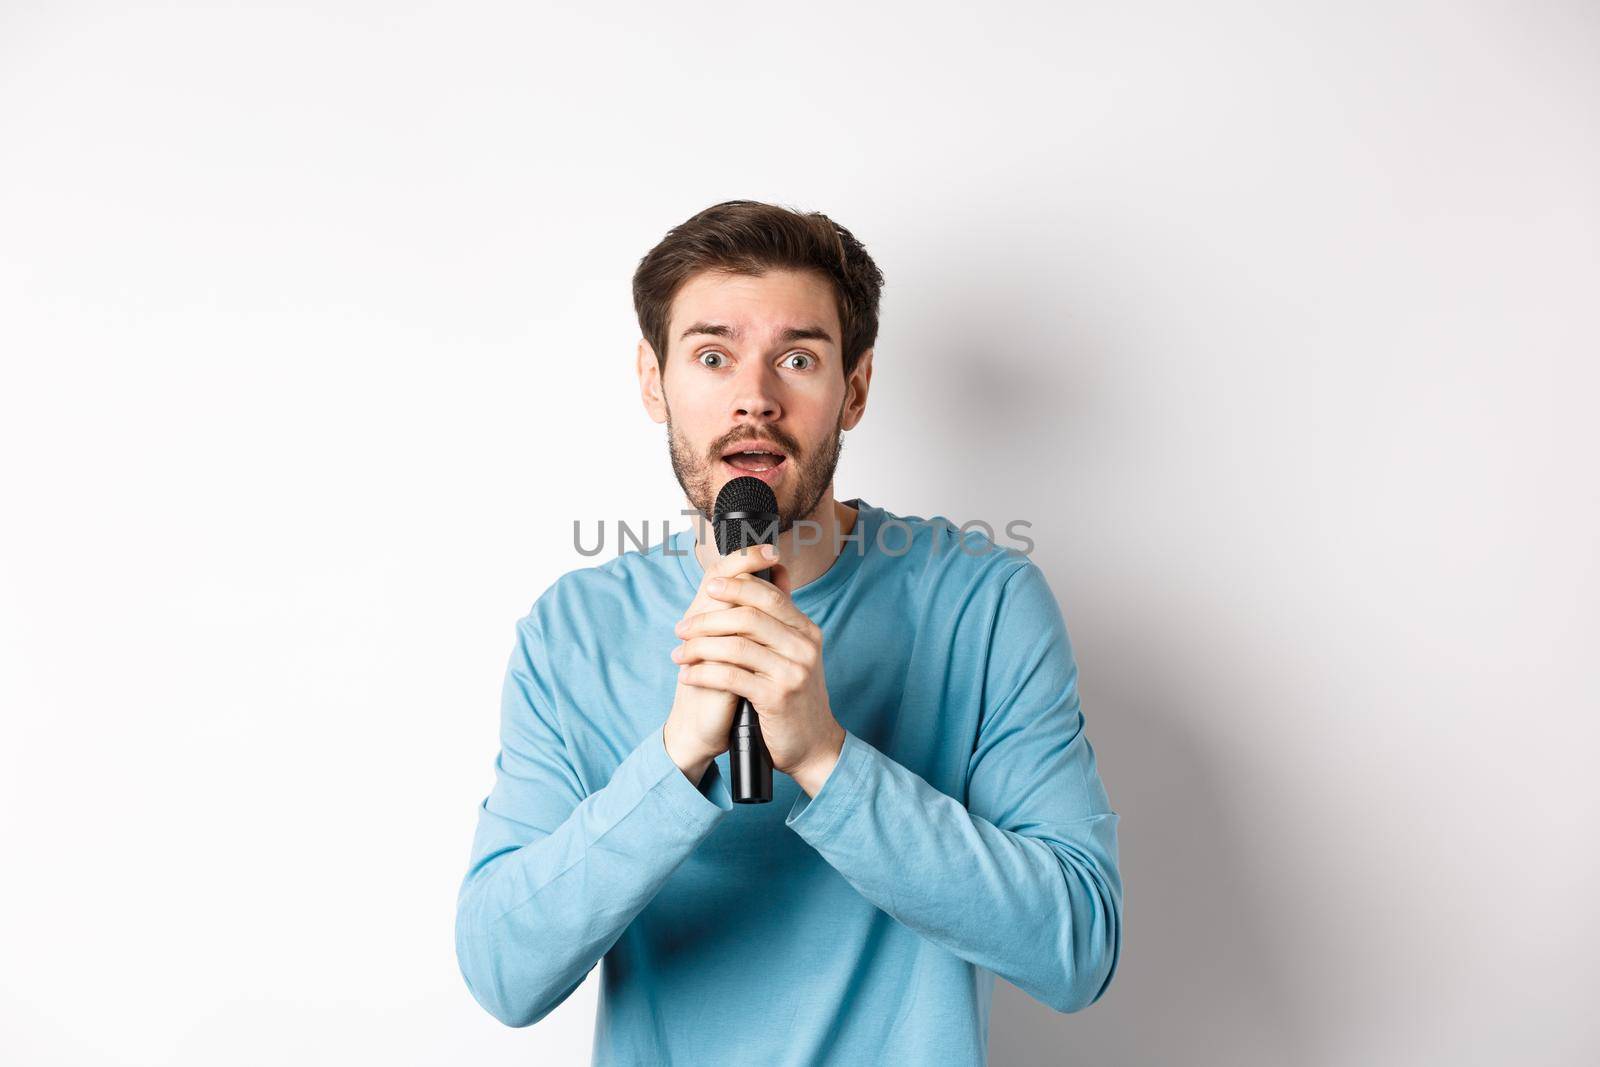 Confused young man looking nervously at camera while singing karaoke, holding microphone, standing over white background.